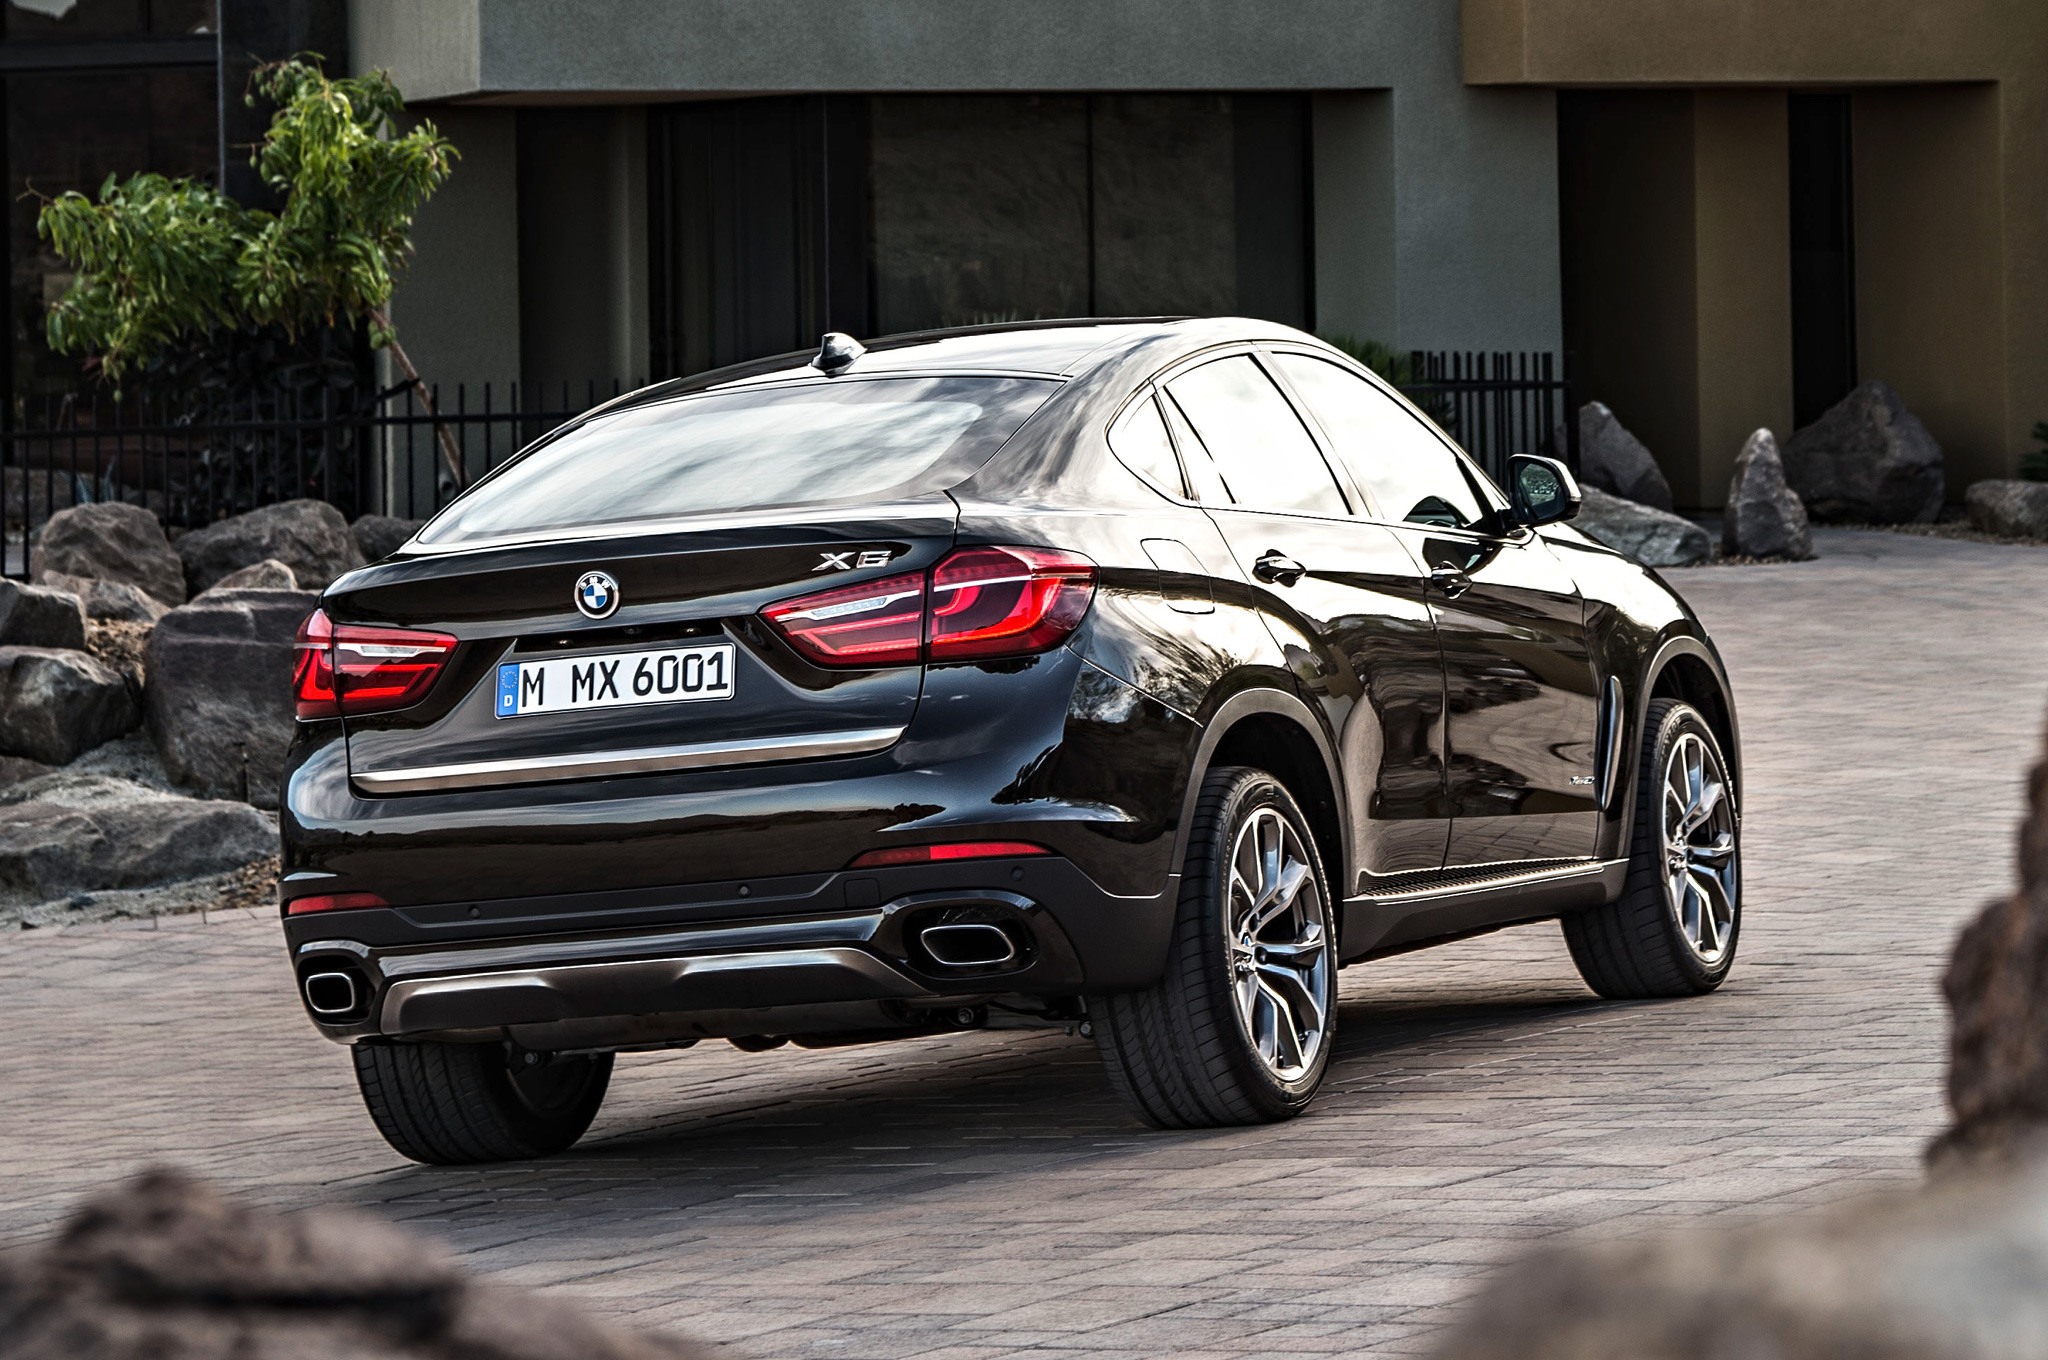 HD Bmw X6 Wallpaper For